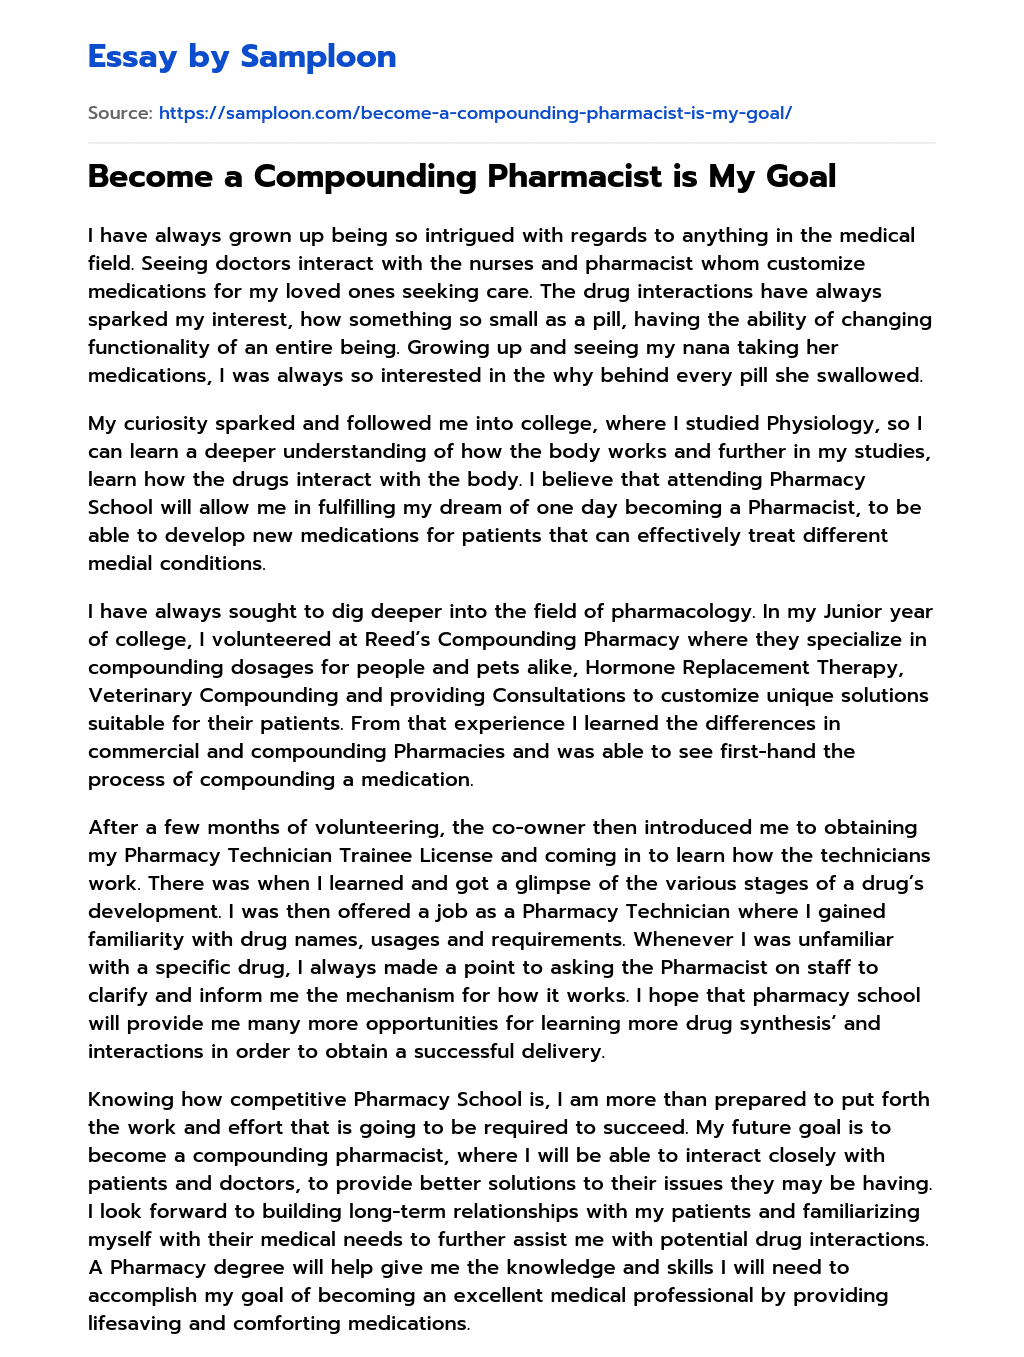 Become a Compounding Pharmacist is My Goal essay